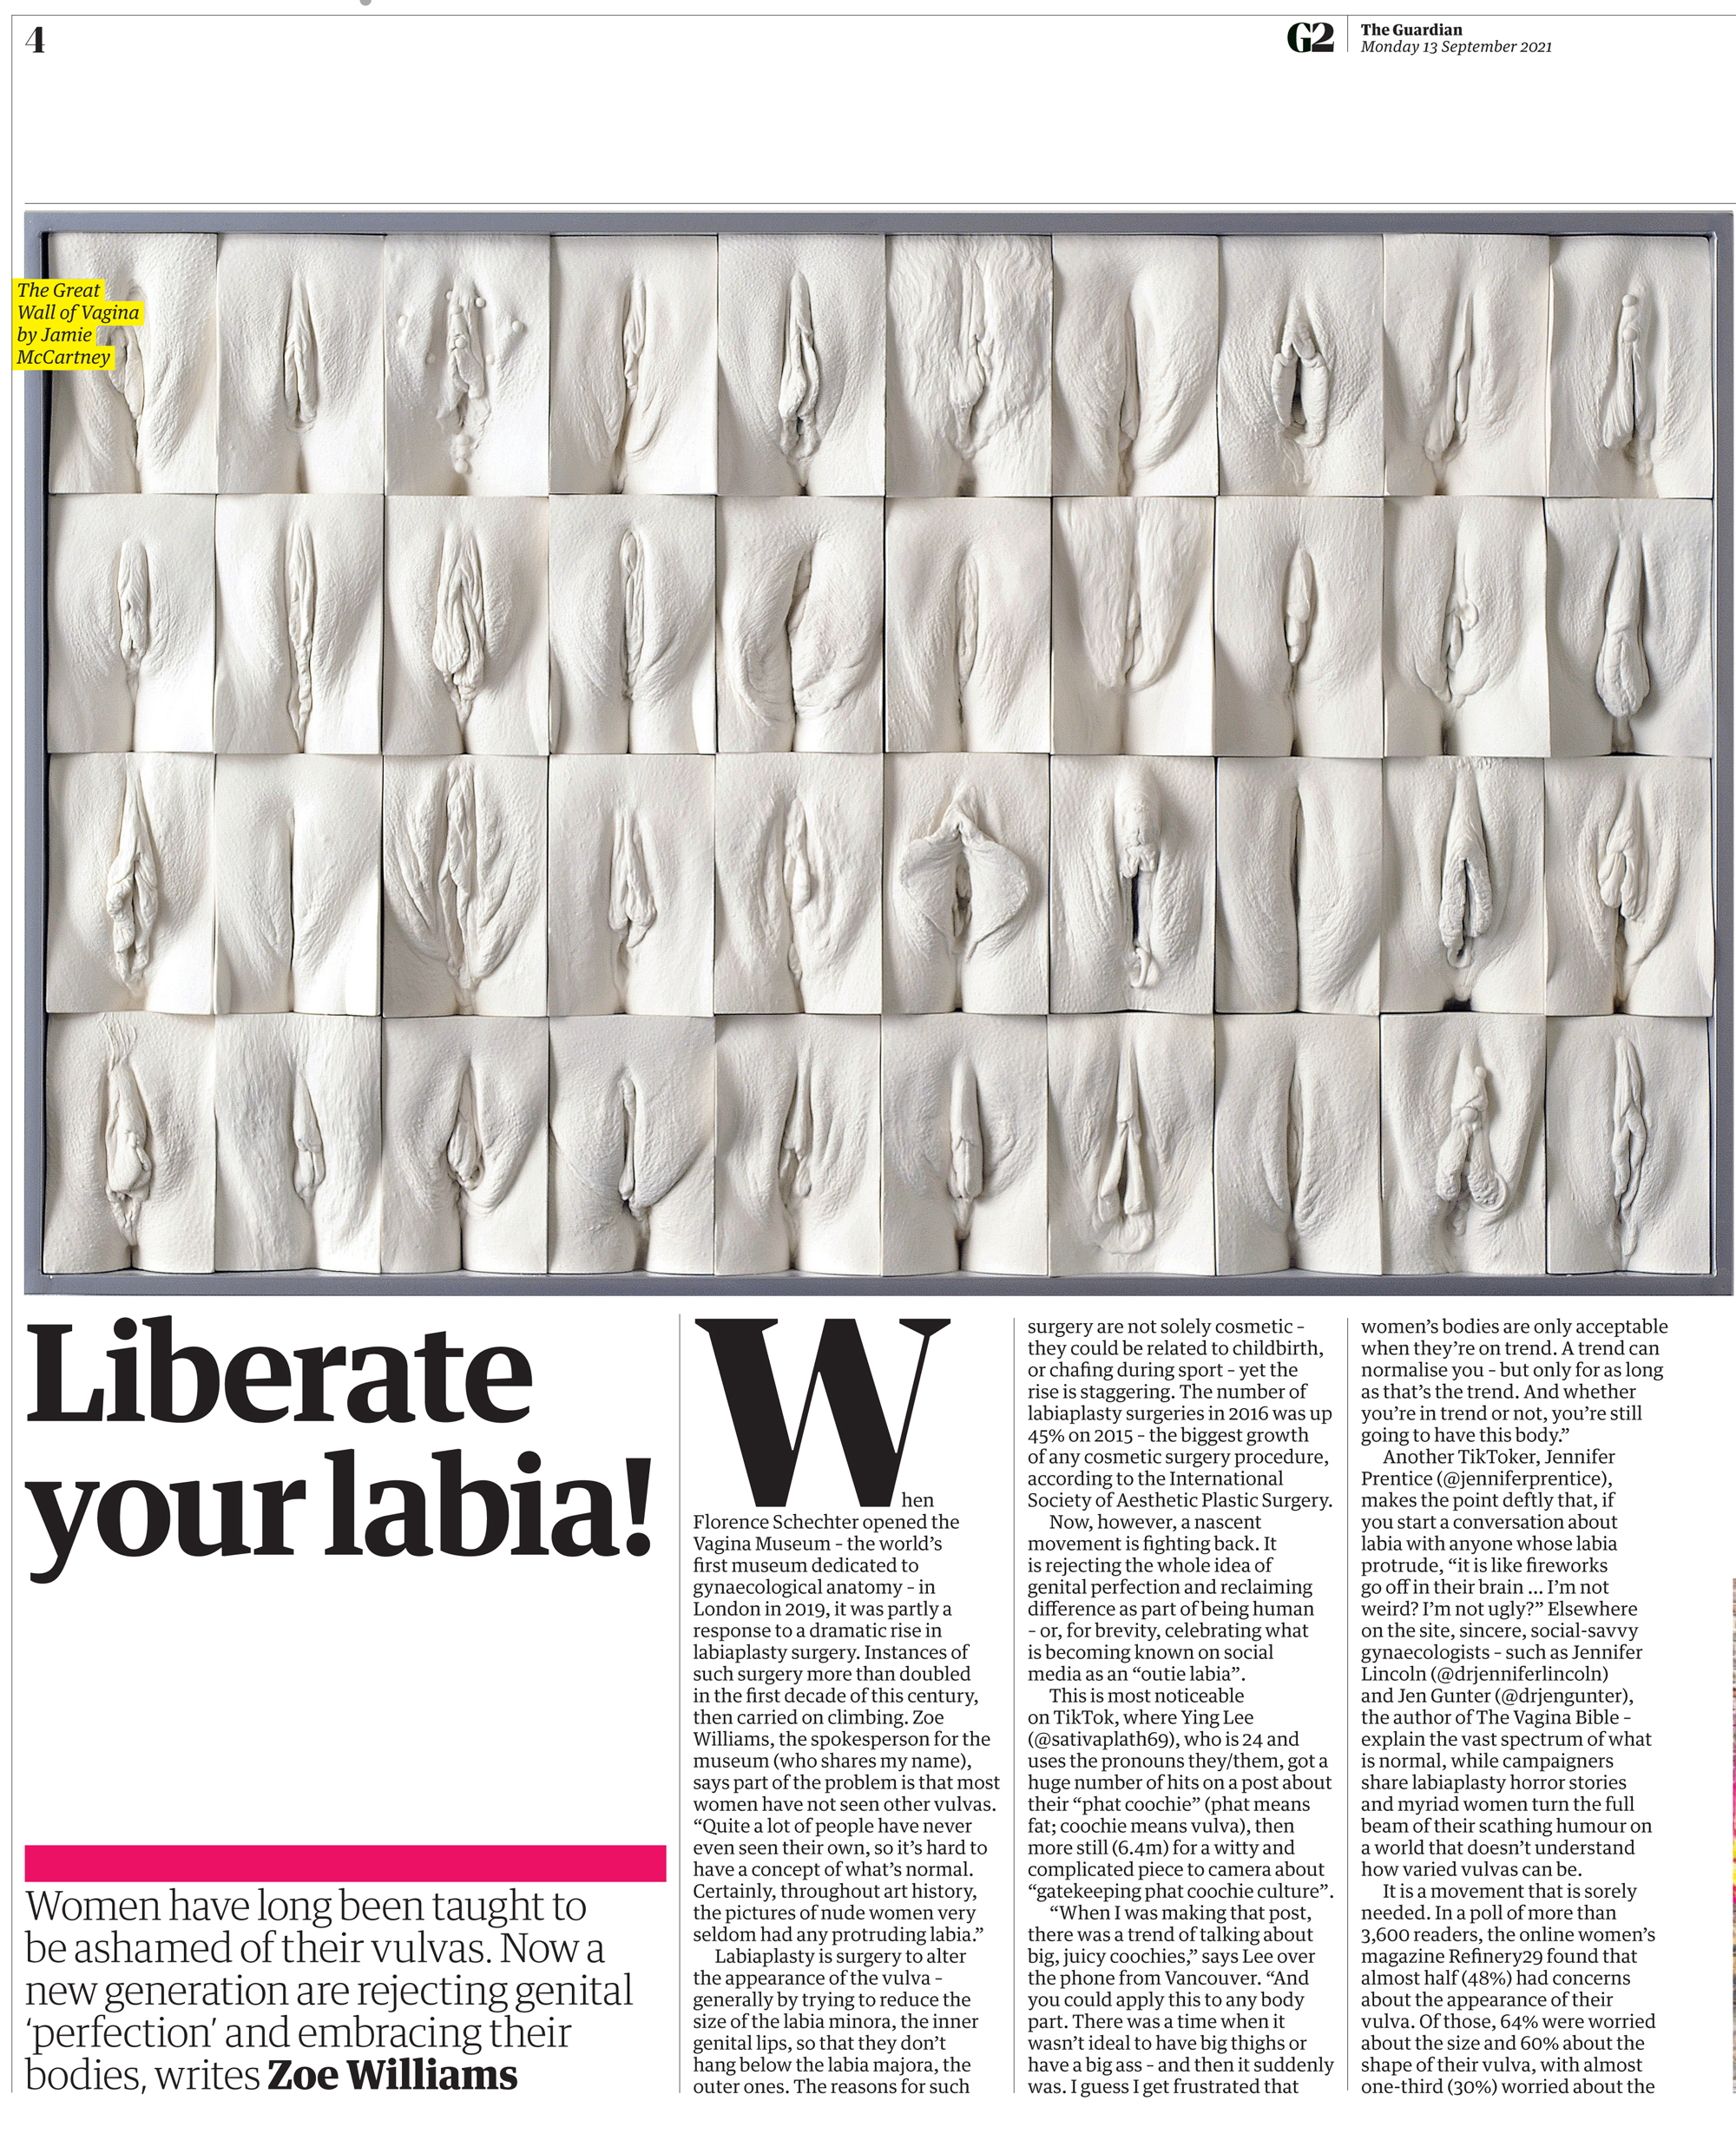 The Guardian on the latest movement in labia art featuring The Great Wall of Vagina